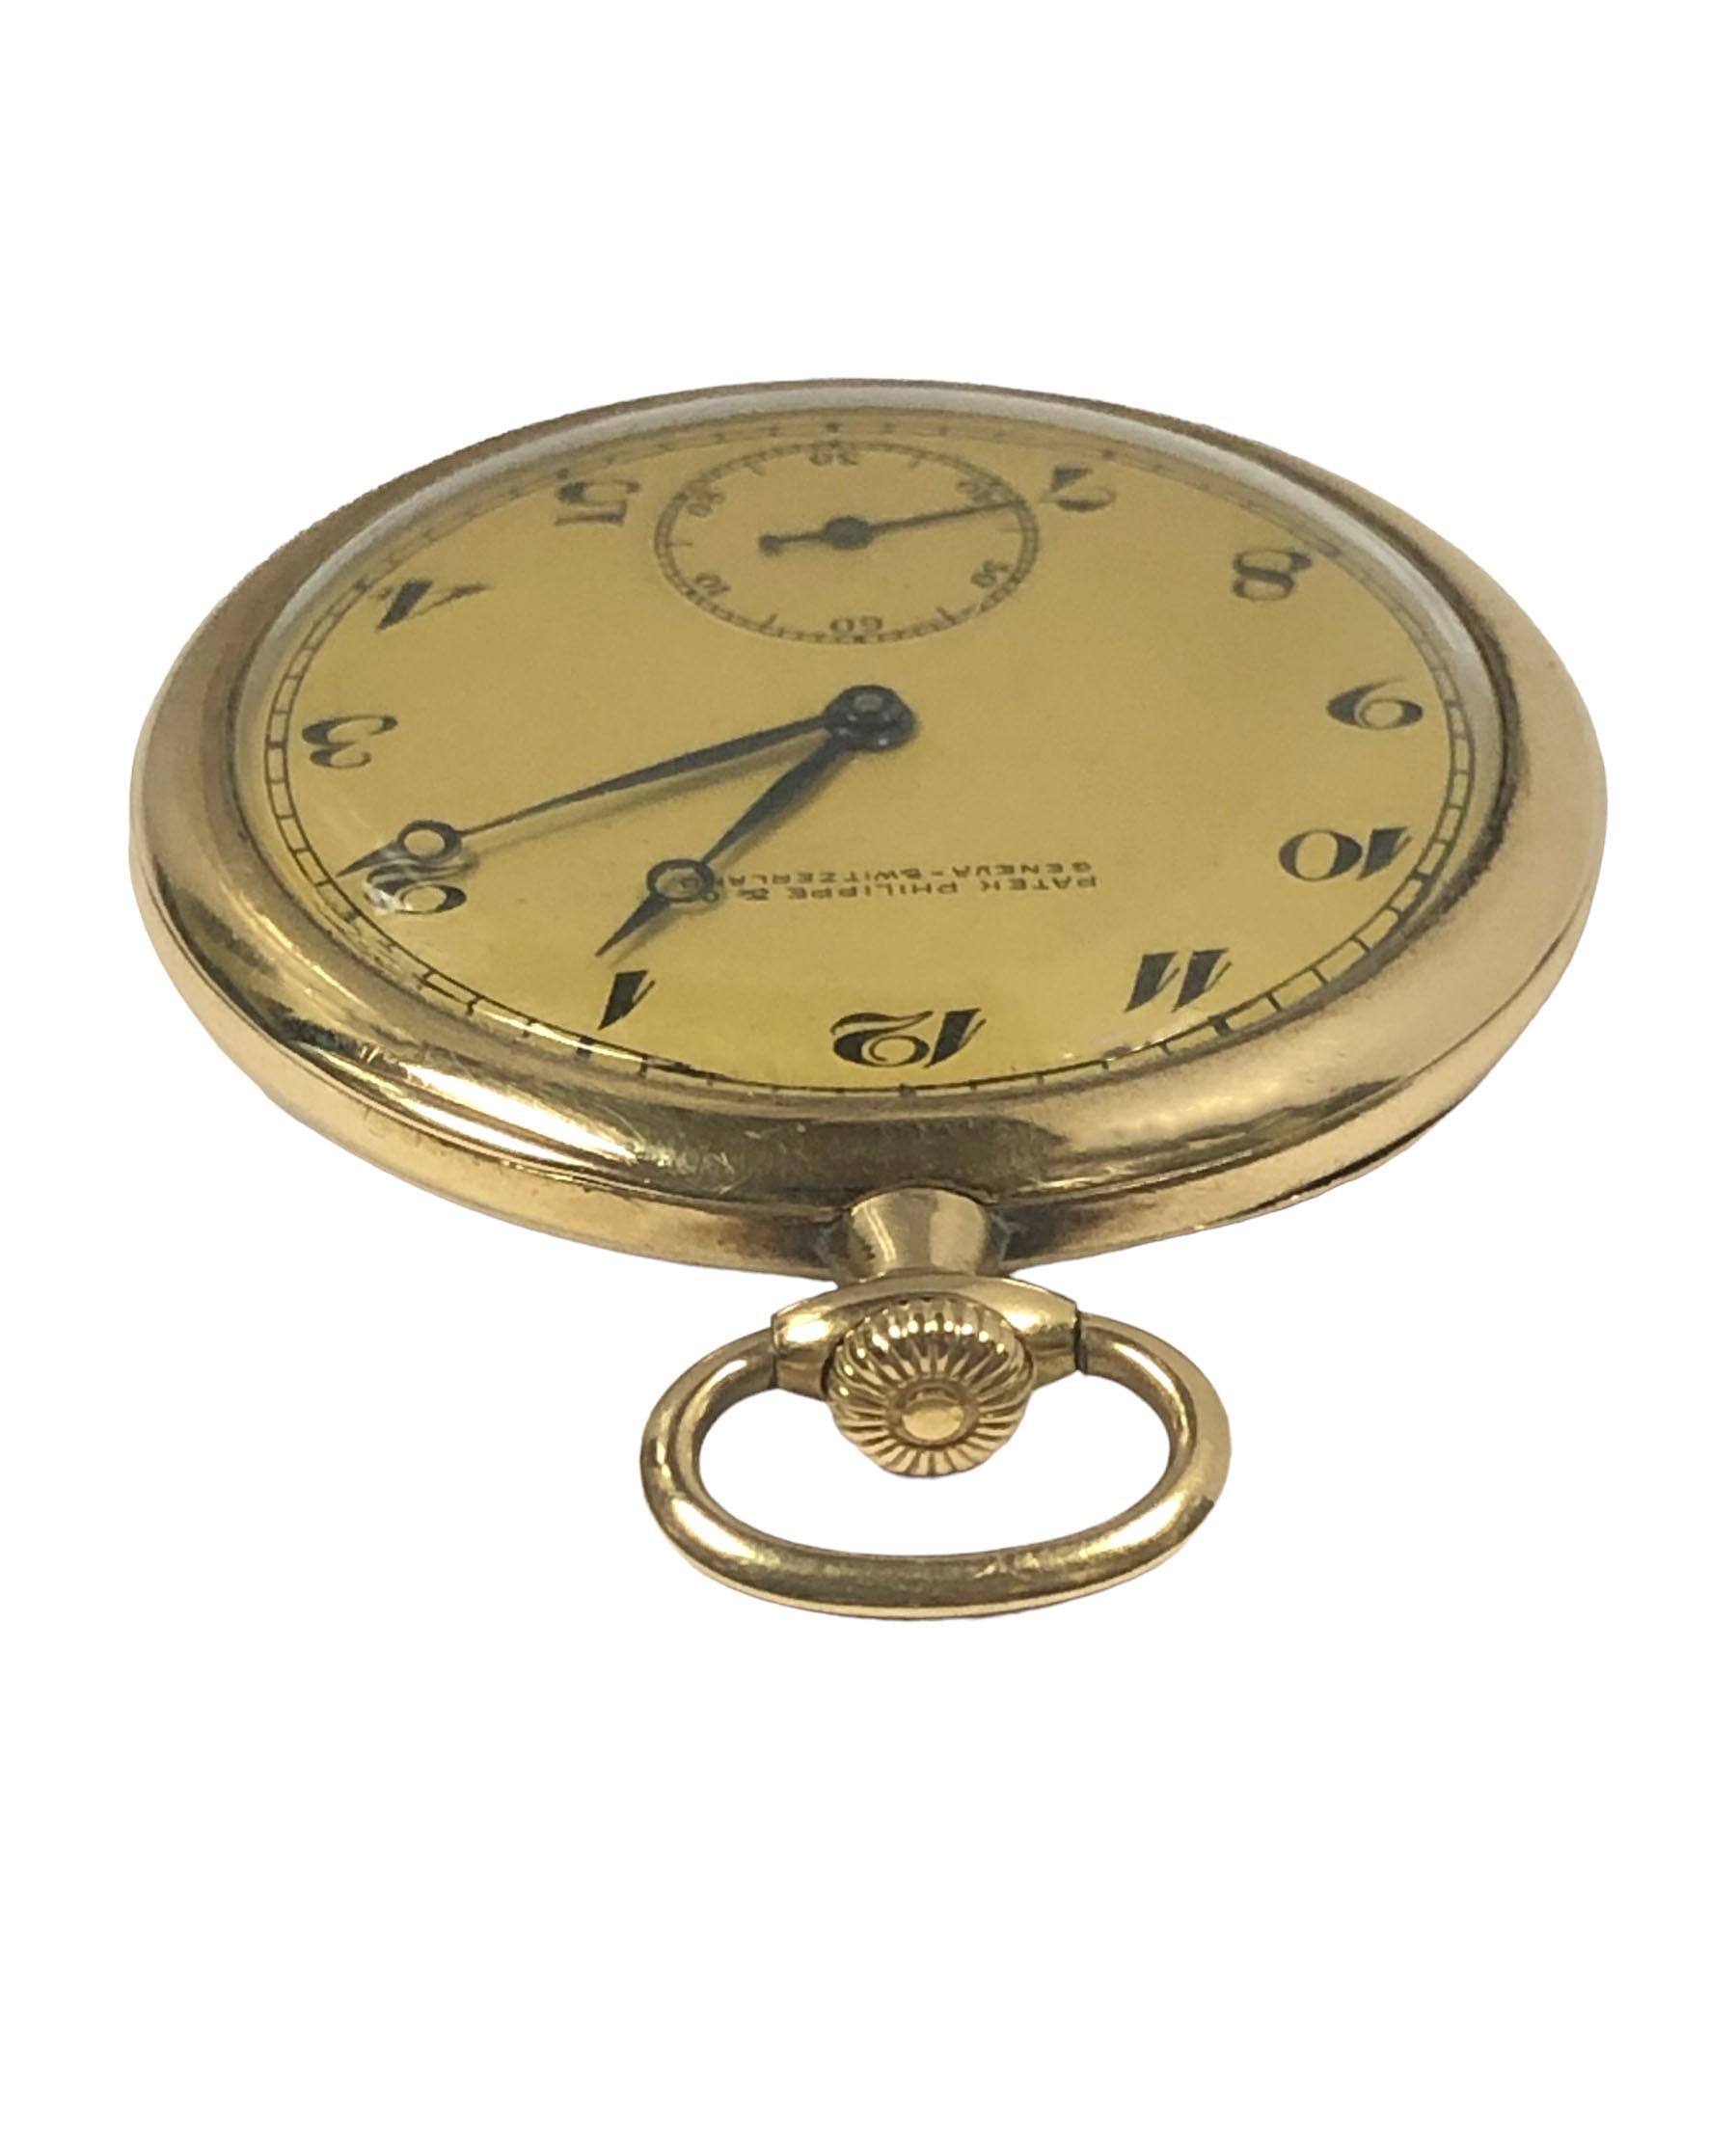 Circa 1920s Patek Philippe Pocket Watch, 44 M.M. 18k Yellow Gold 3 piece case with embossed Enamel initial design work on the case back. 18 Jewel, mechanical, manual wind nickle lever movement. Original and excellent Gold Gilt metal dial with sub